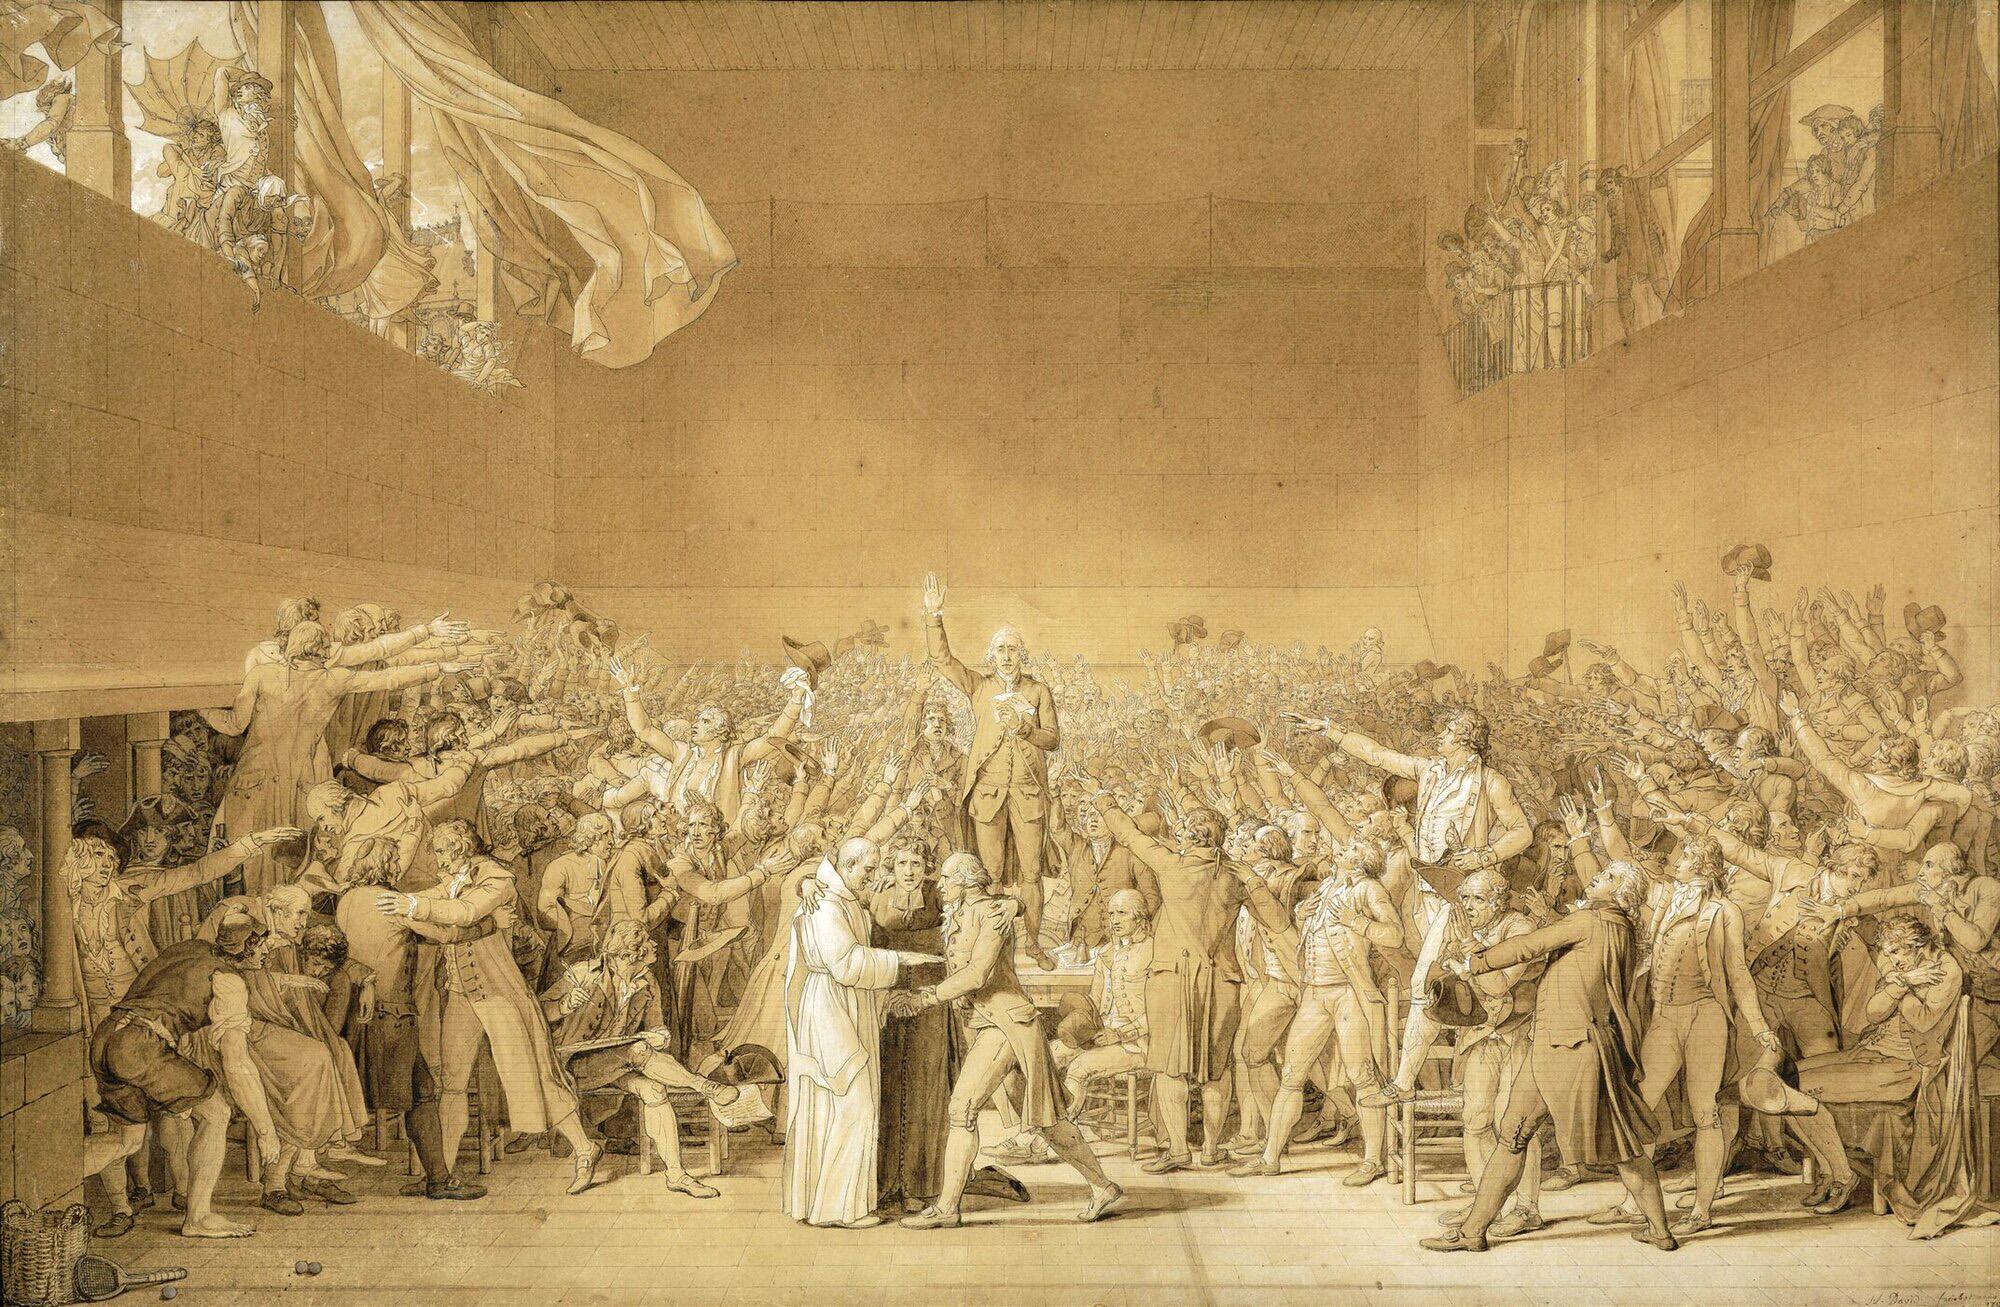 The Tennis Court Oath: How The French Revolution Began - Radical Tea Towel